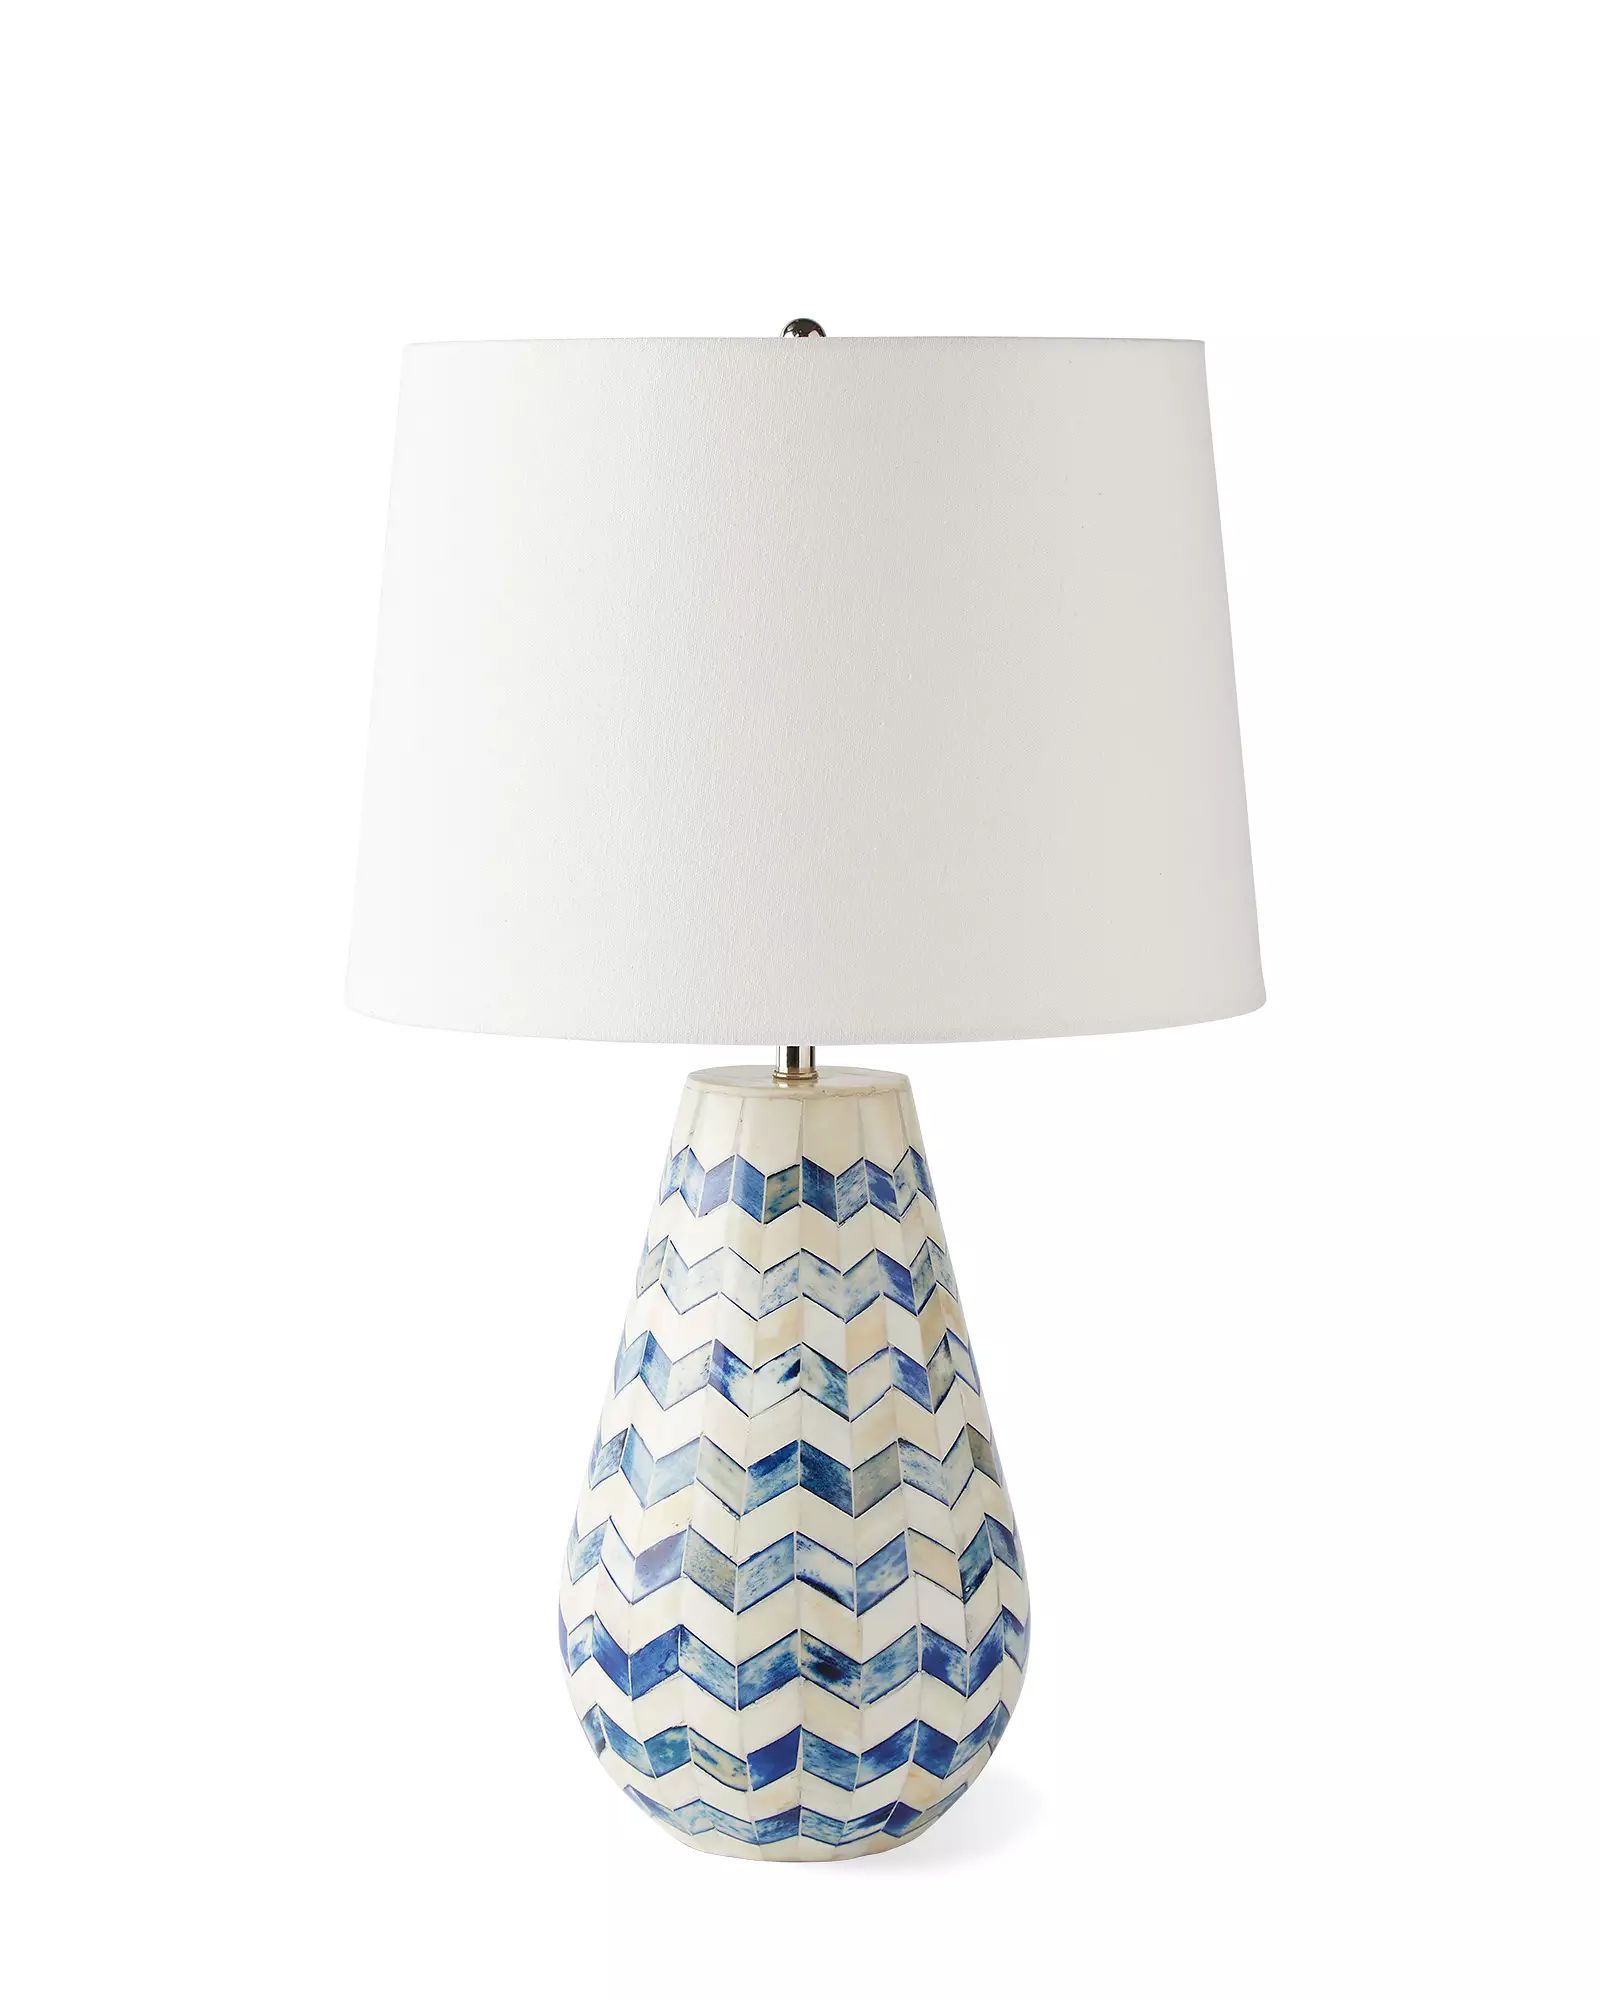 Westerly Bone Inlay Bedside Table Lamp | Serena and Lily